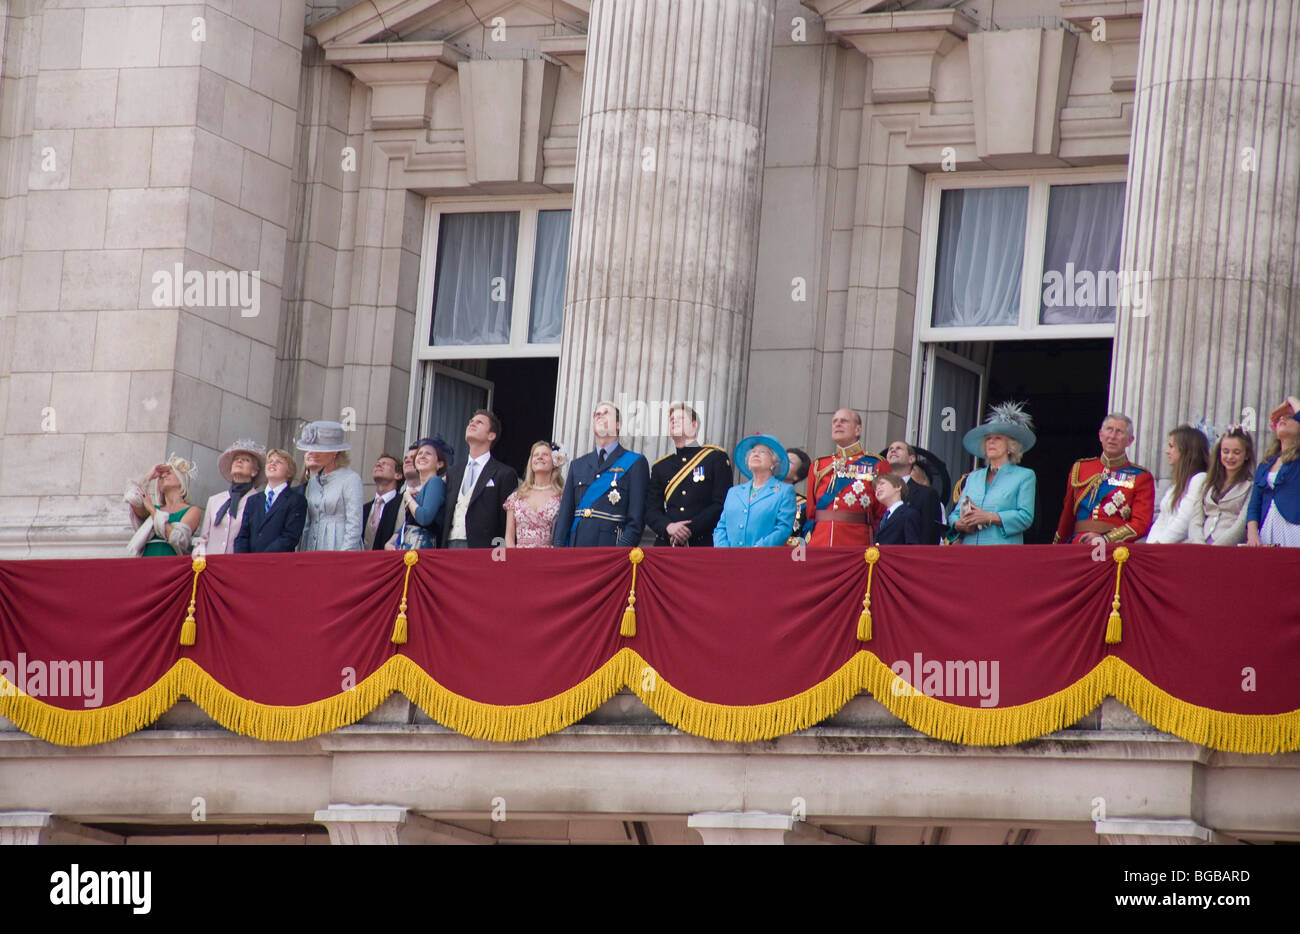 England, London, Buckingham Palace. Birthday of Queen Elizabeth II, standing on balcony with members of the Royal Family Stock Photo